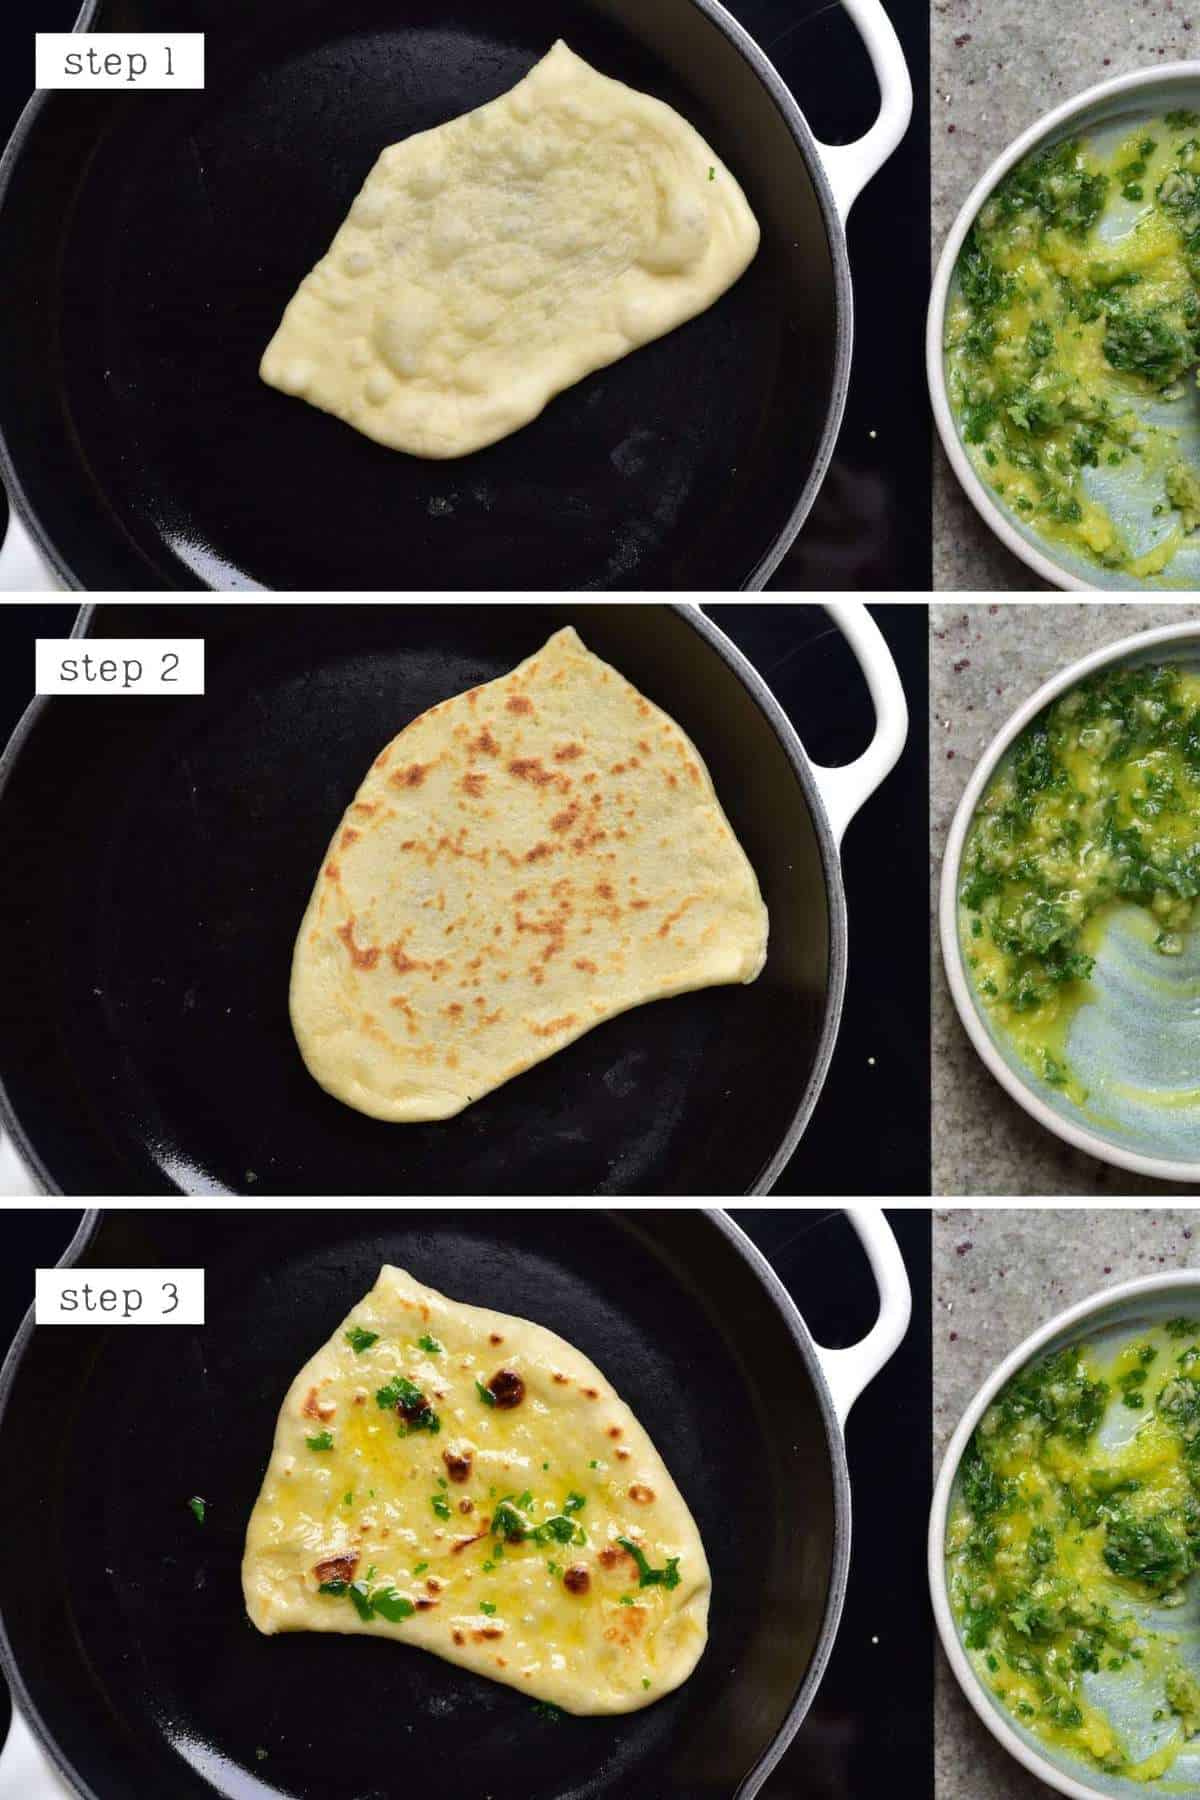 Steps for cooking garlic naan